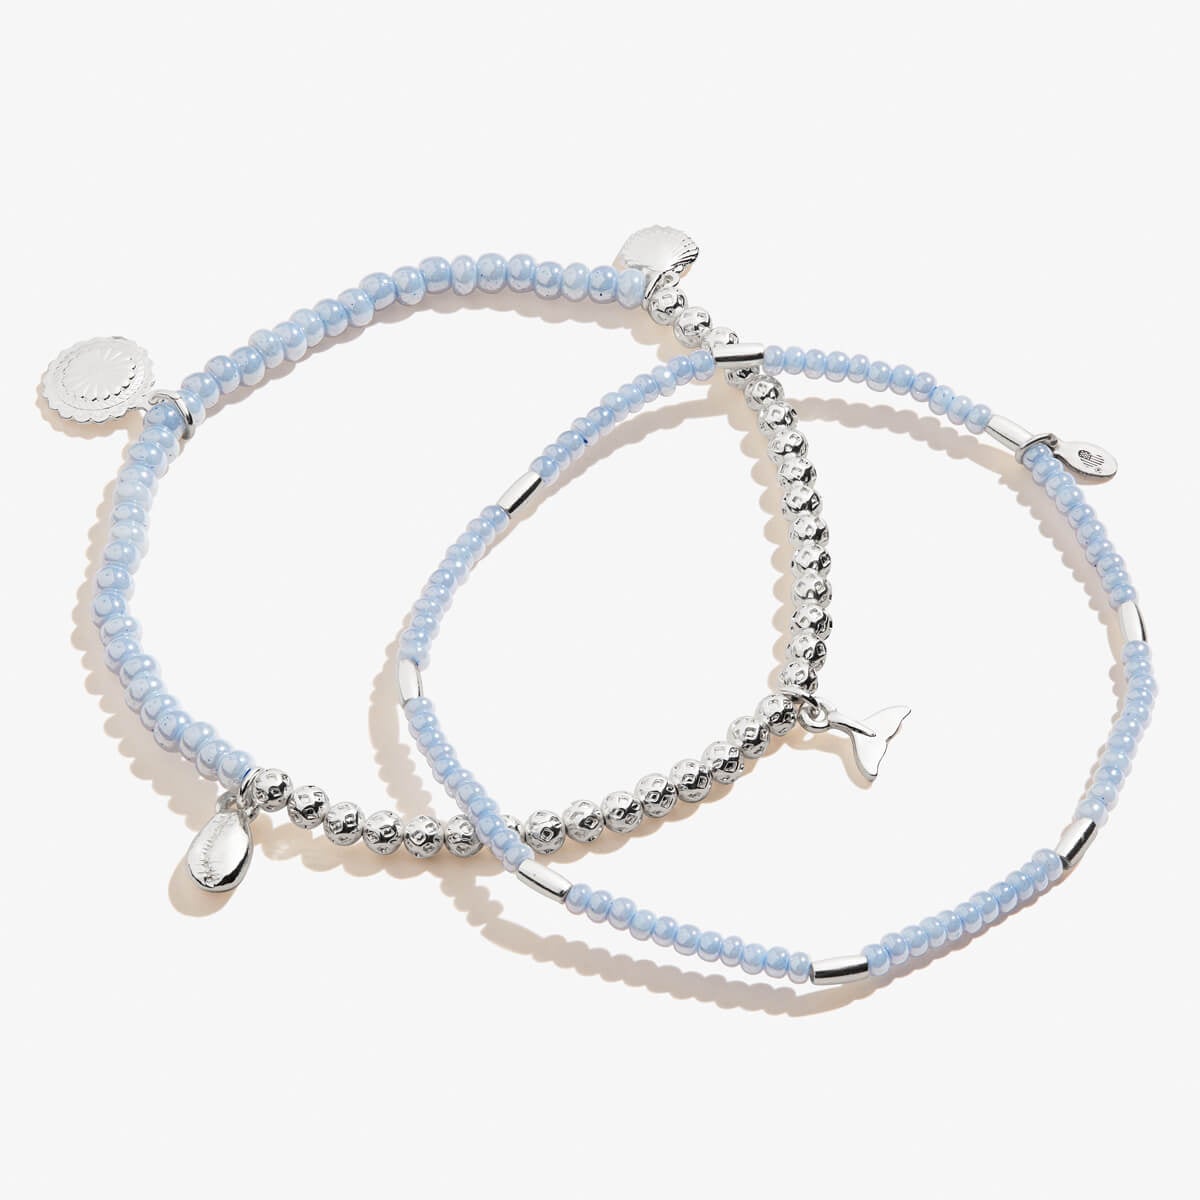 Whale Tail Stretch Anklets, Set of 2